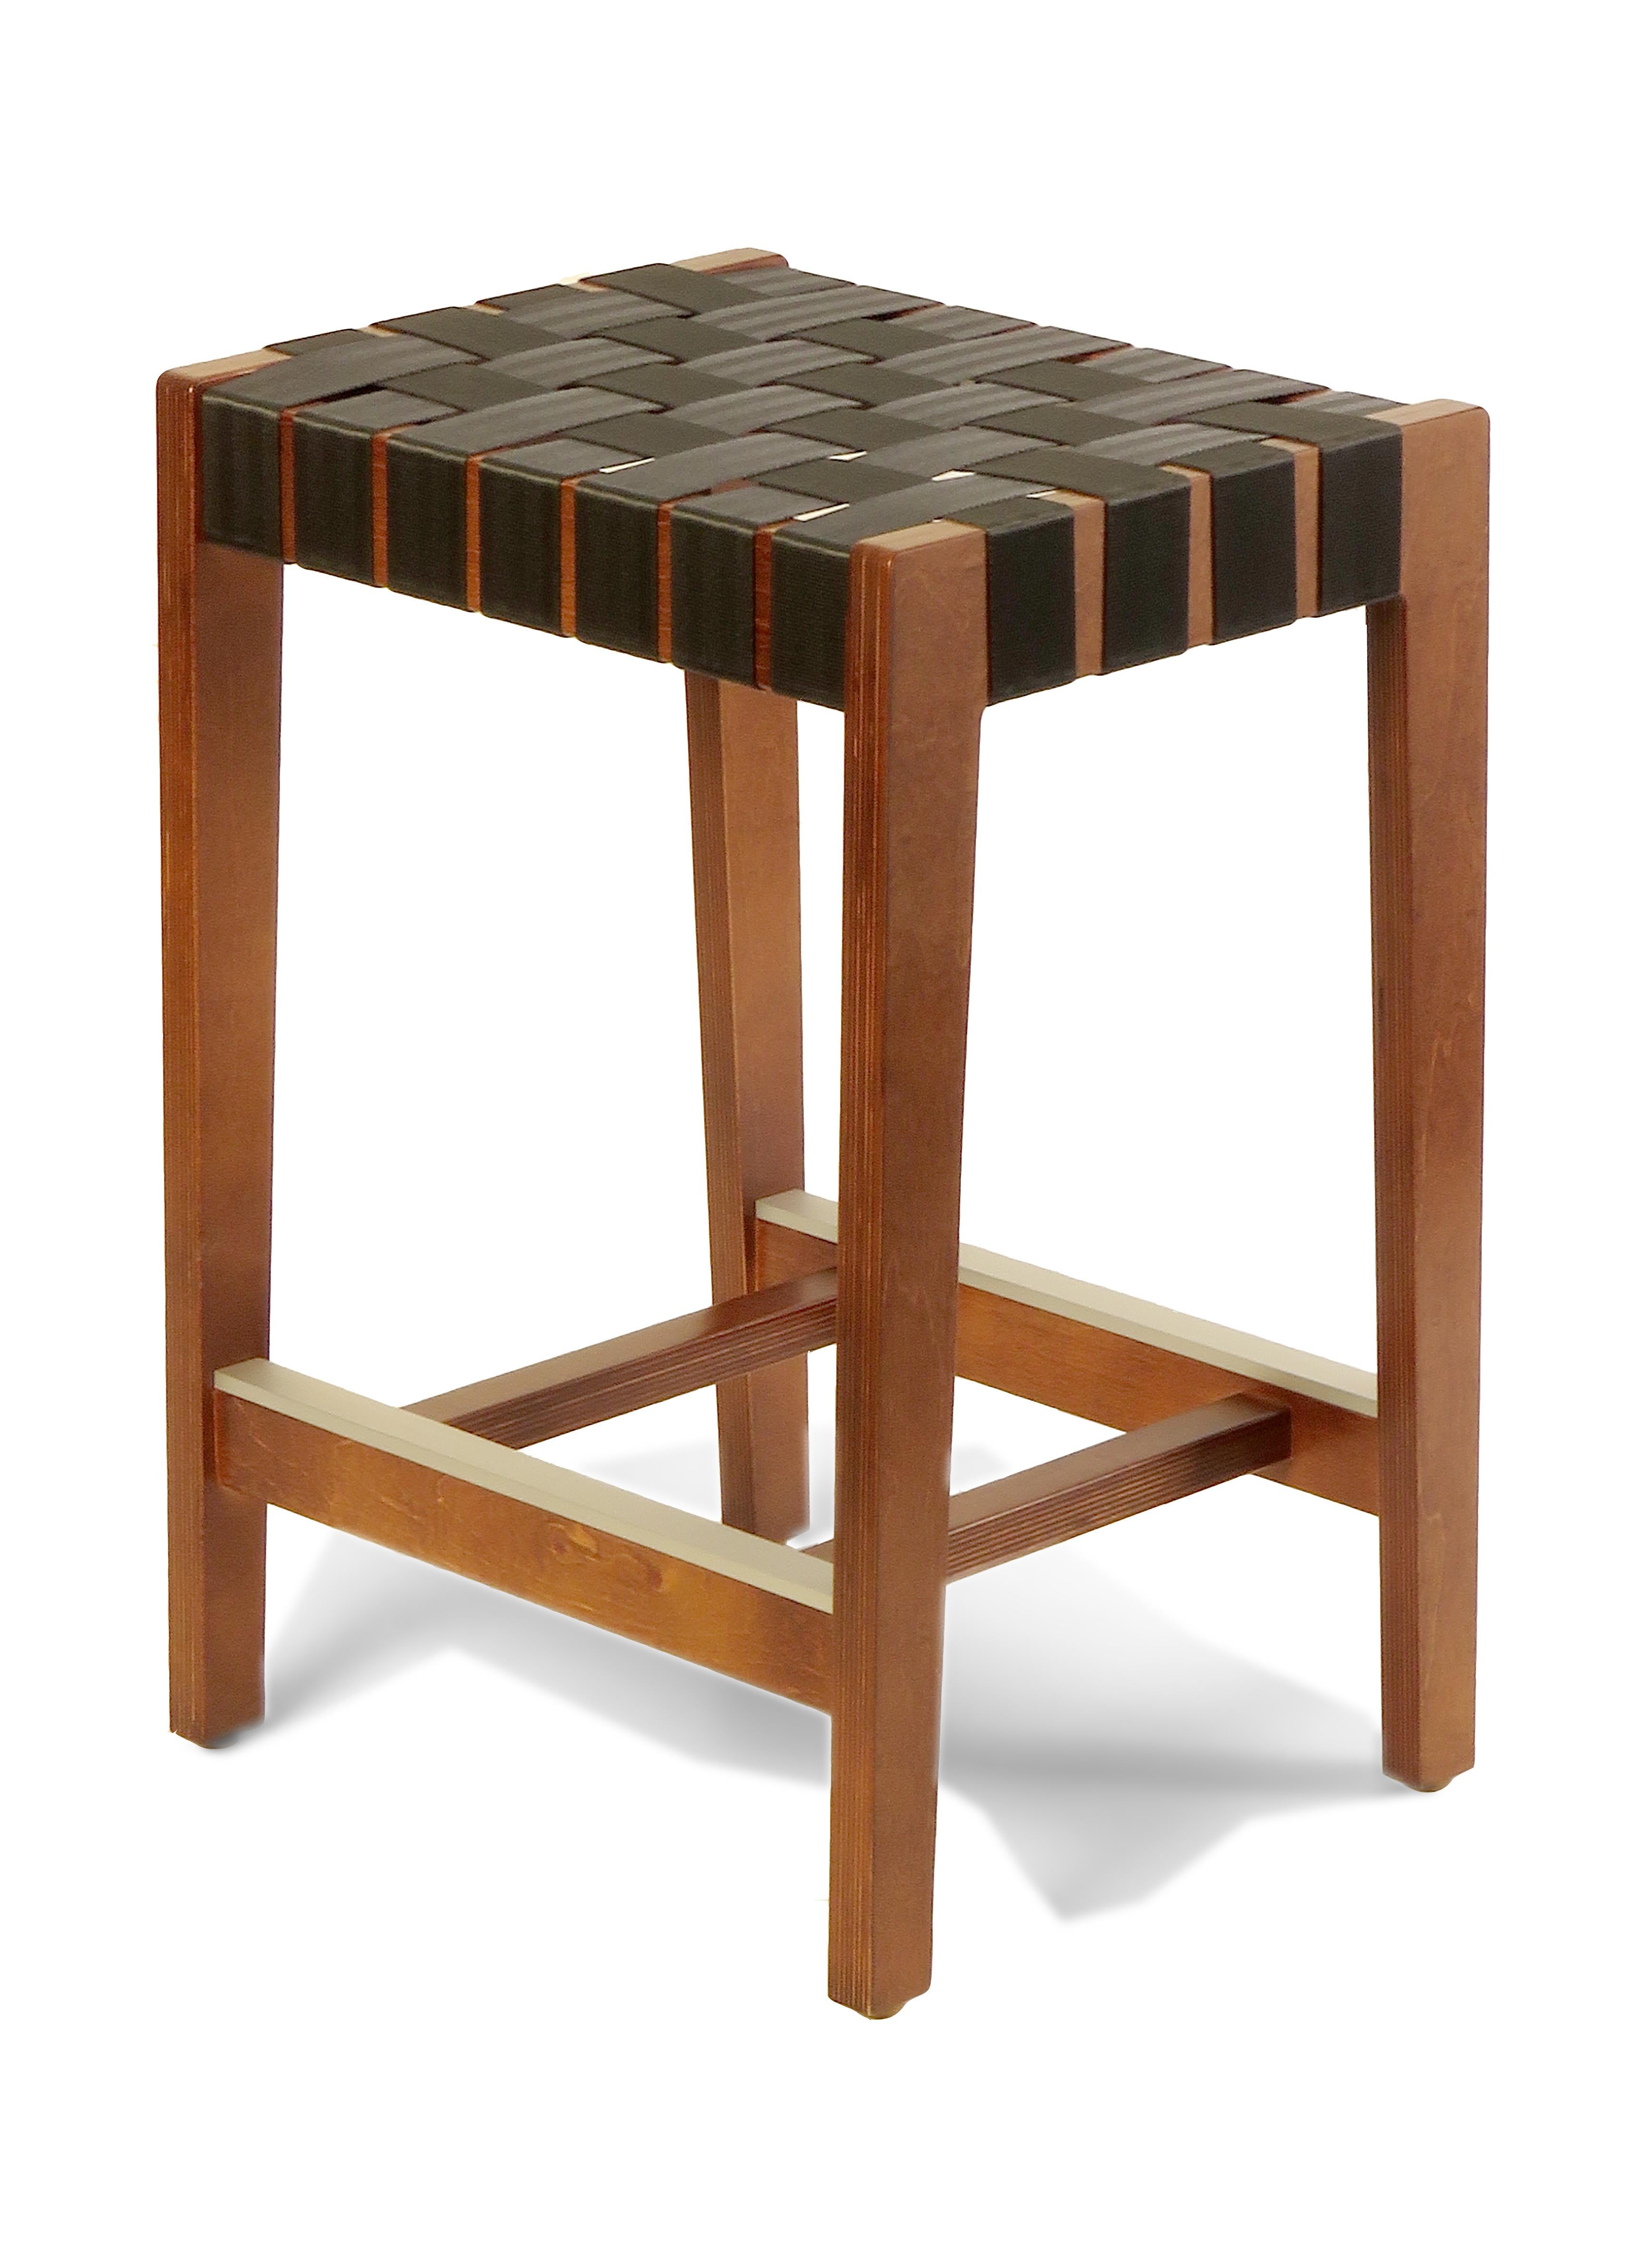 Maple Black Finish Bar Stool with Orange Woven Seat Made in USA by Peter Danko For Sale 1